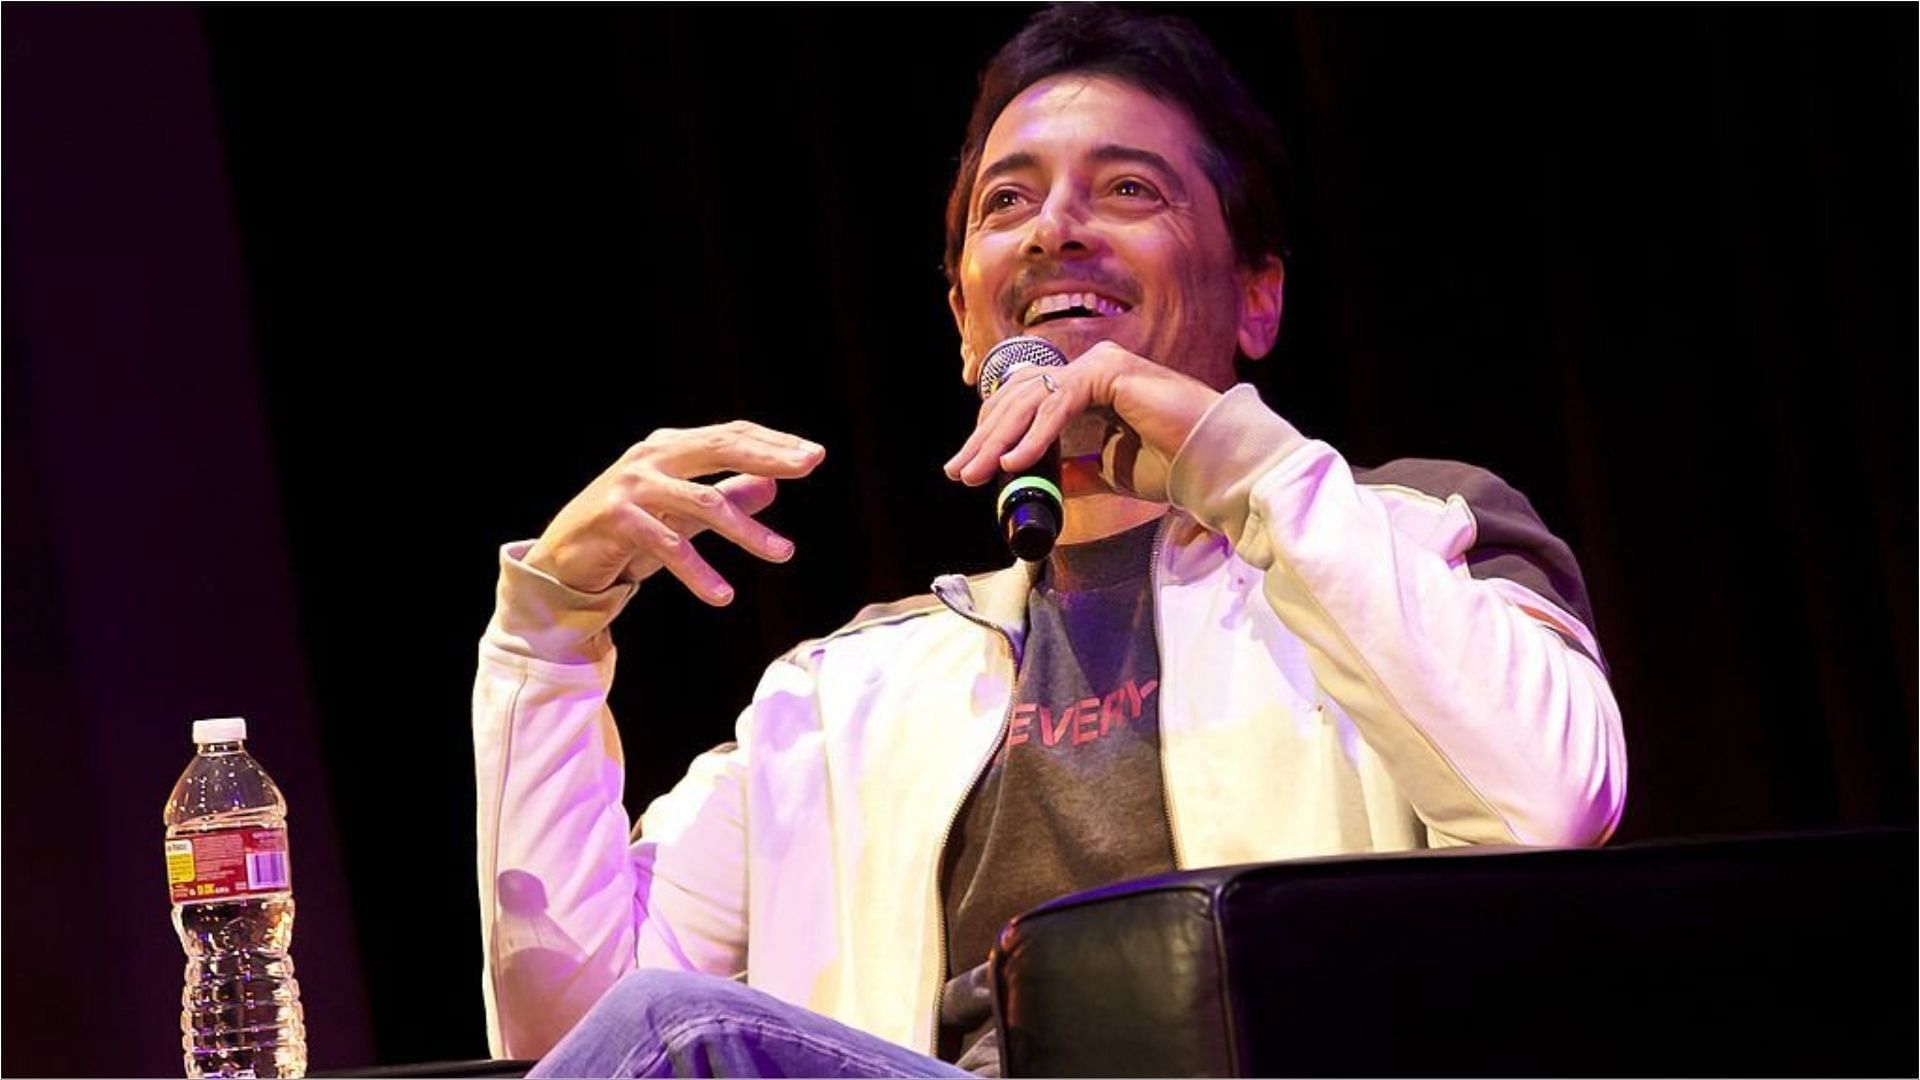 Scott Baio revealed that he is leaving California for several issues (Image via Tibrina Hobson/Getty Images)